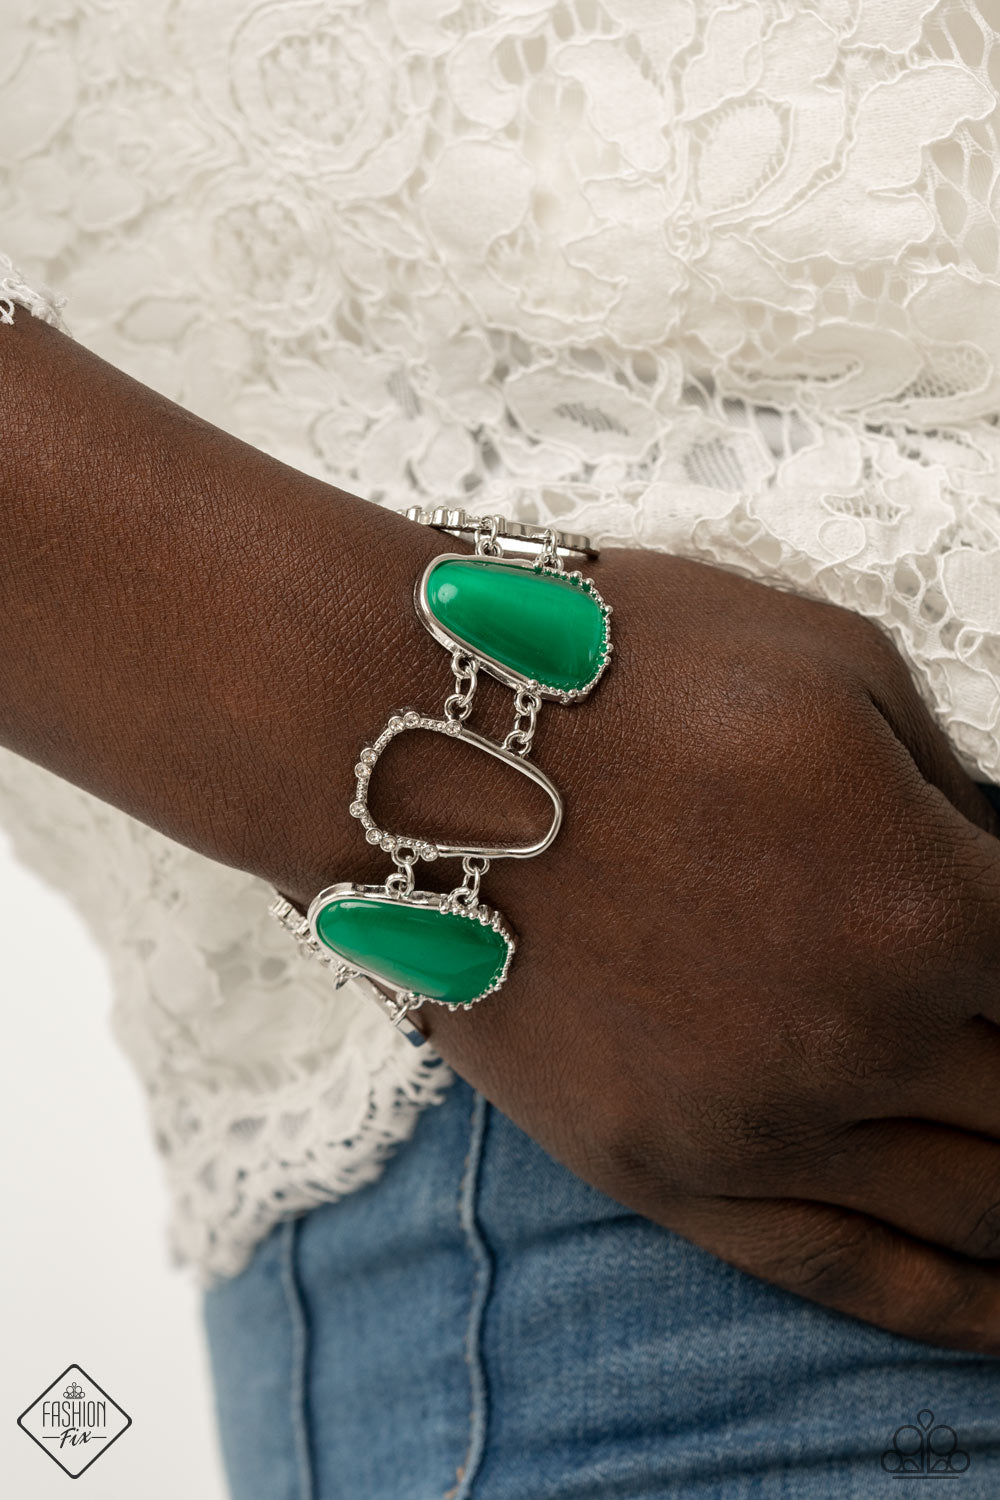 Yacht Club Couture Bracelet - Green